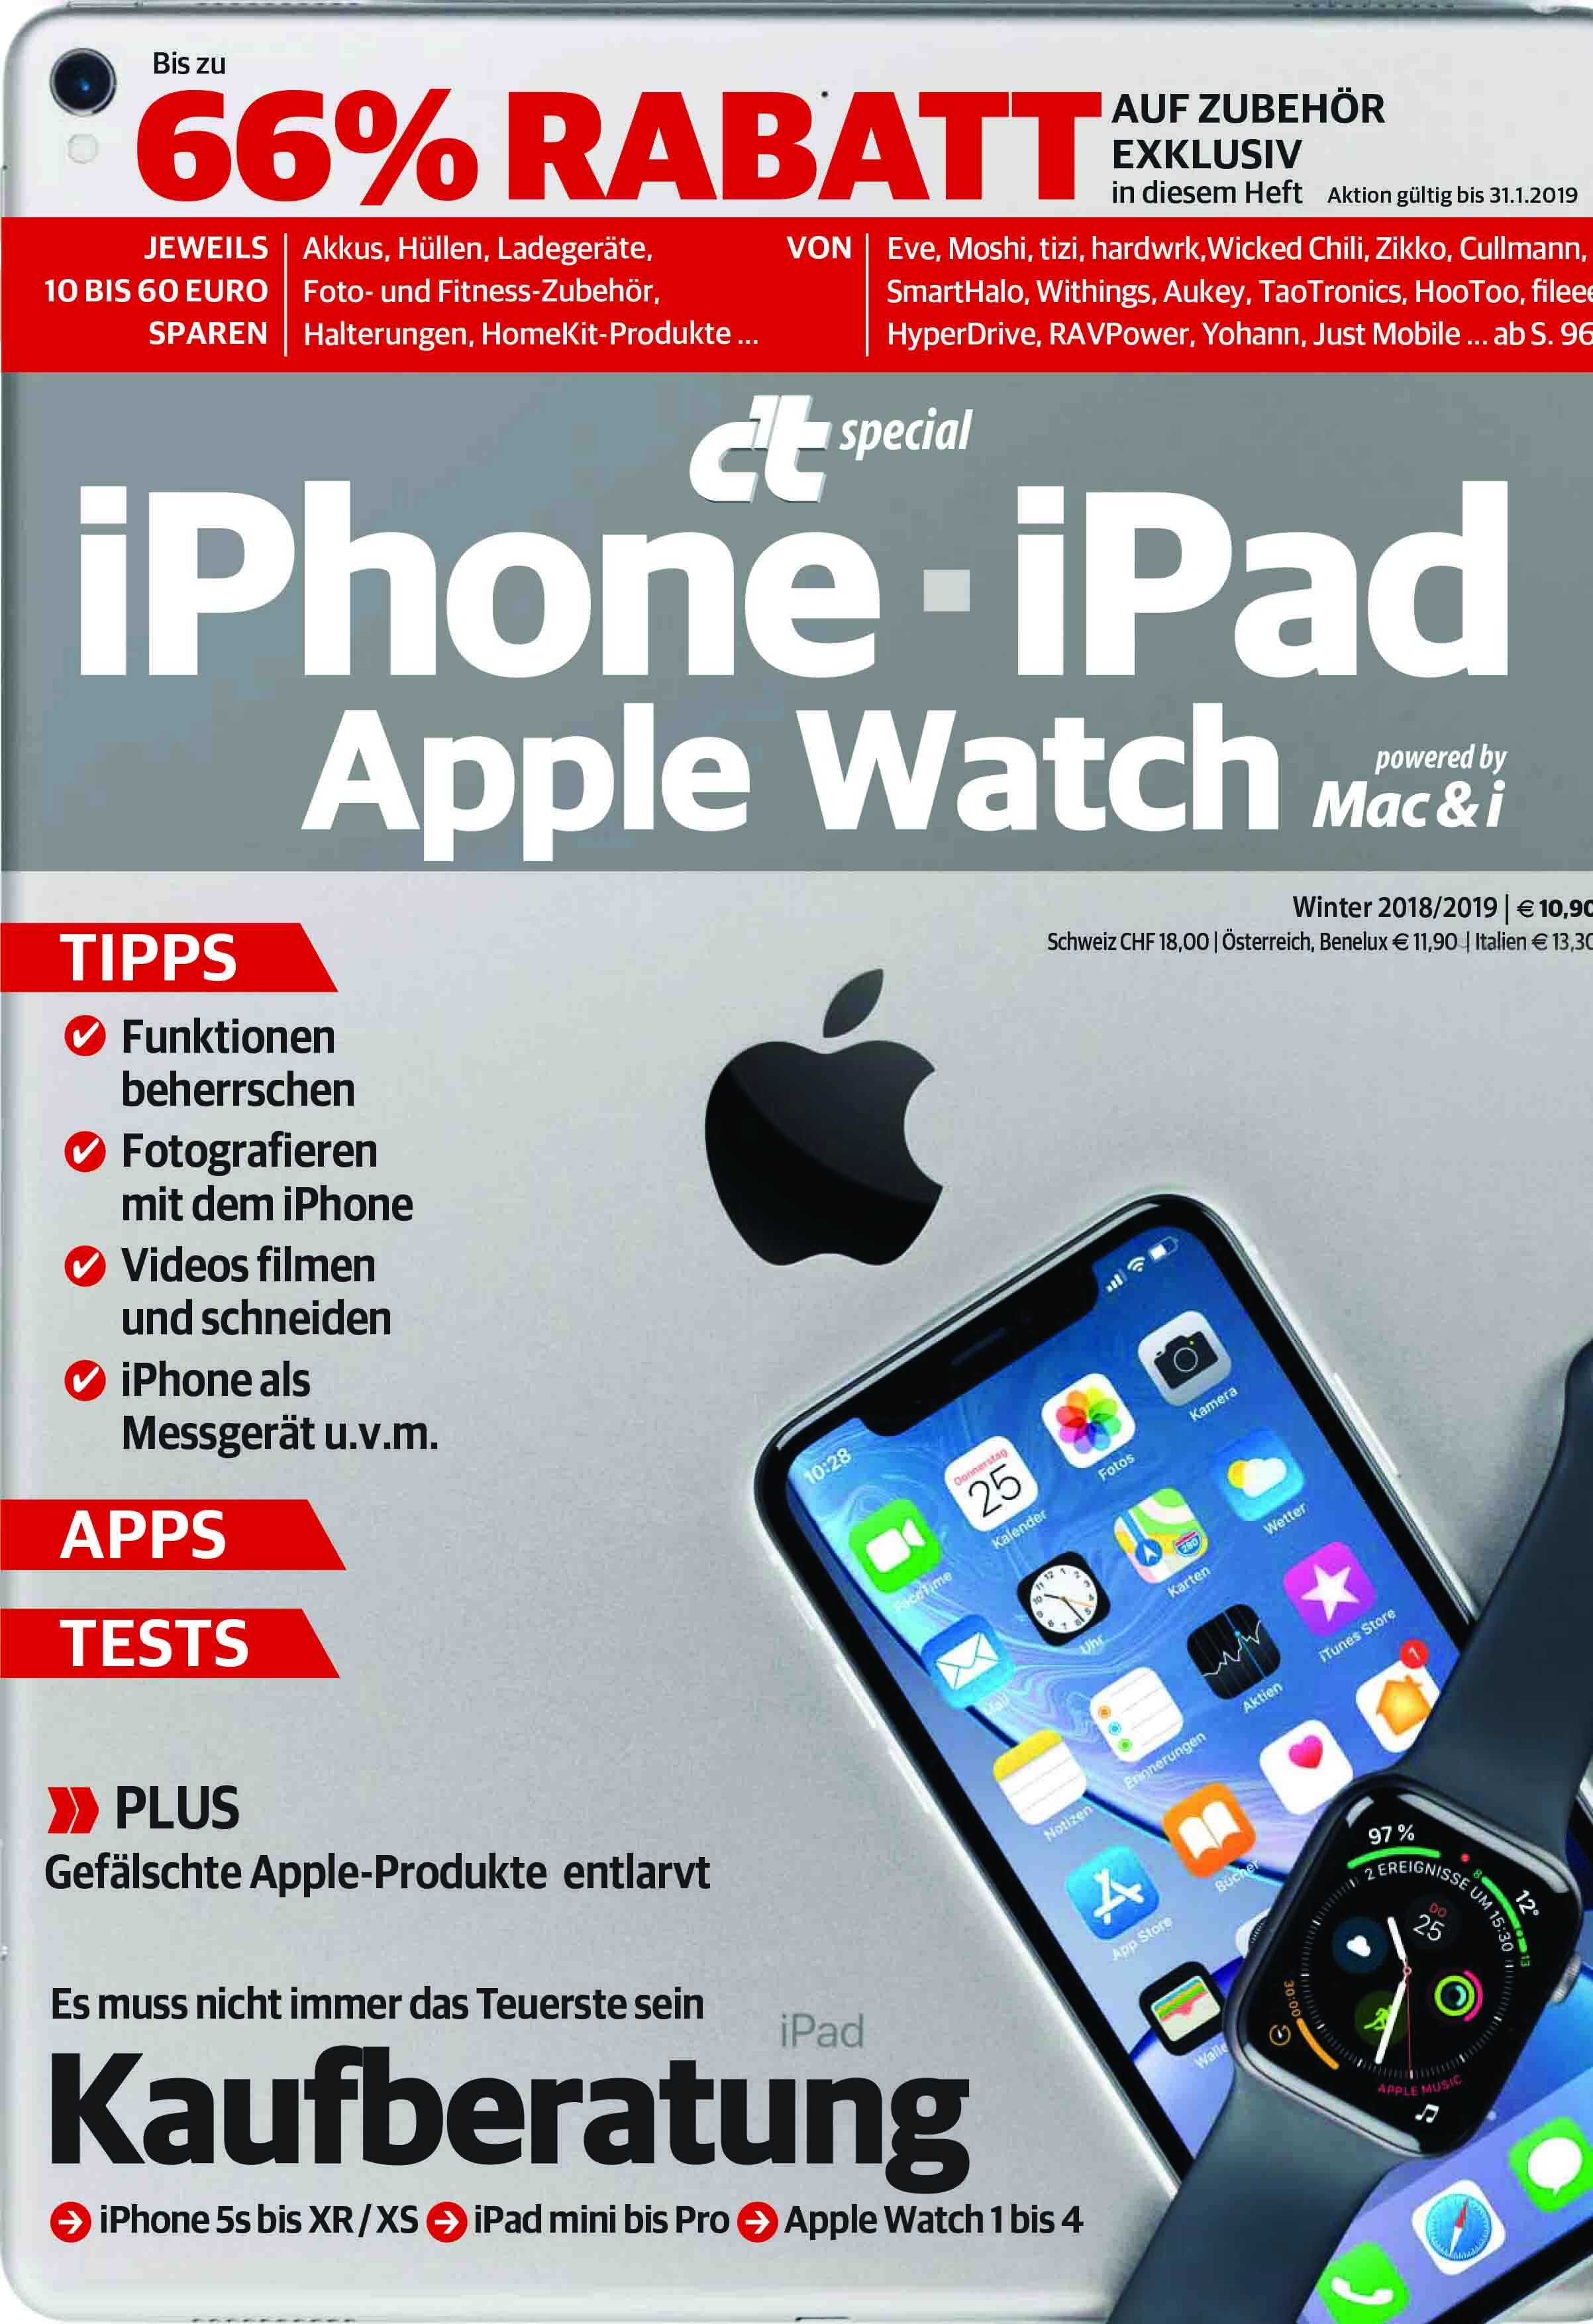 c't special iPhone - iPad - Apple Watch